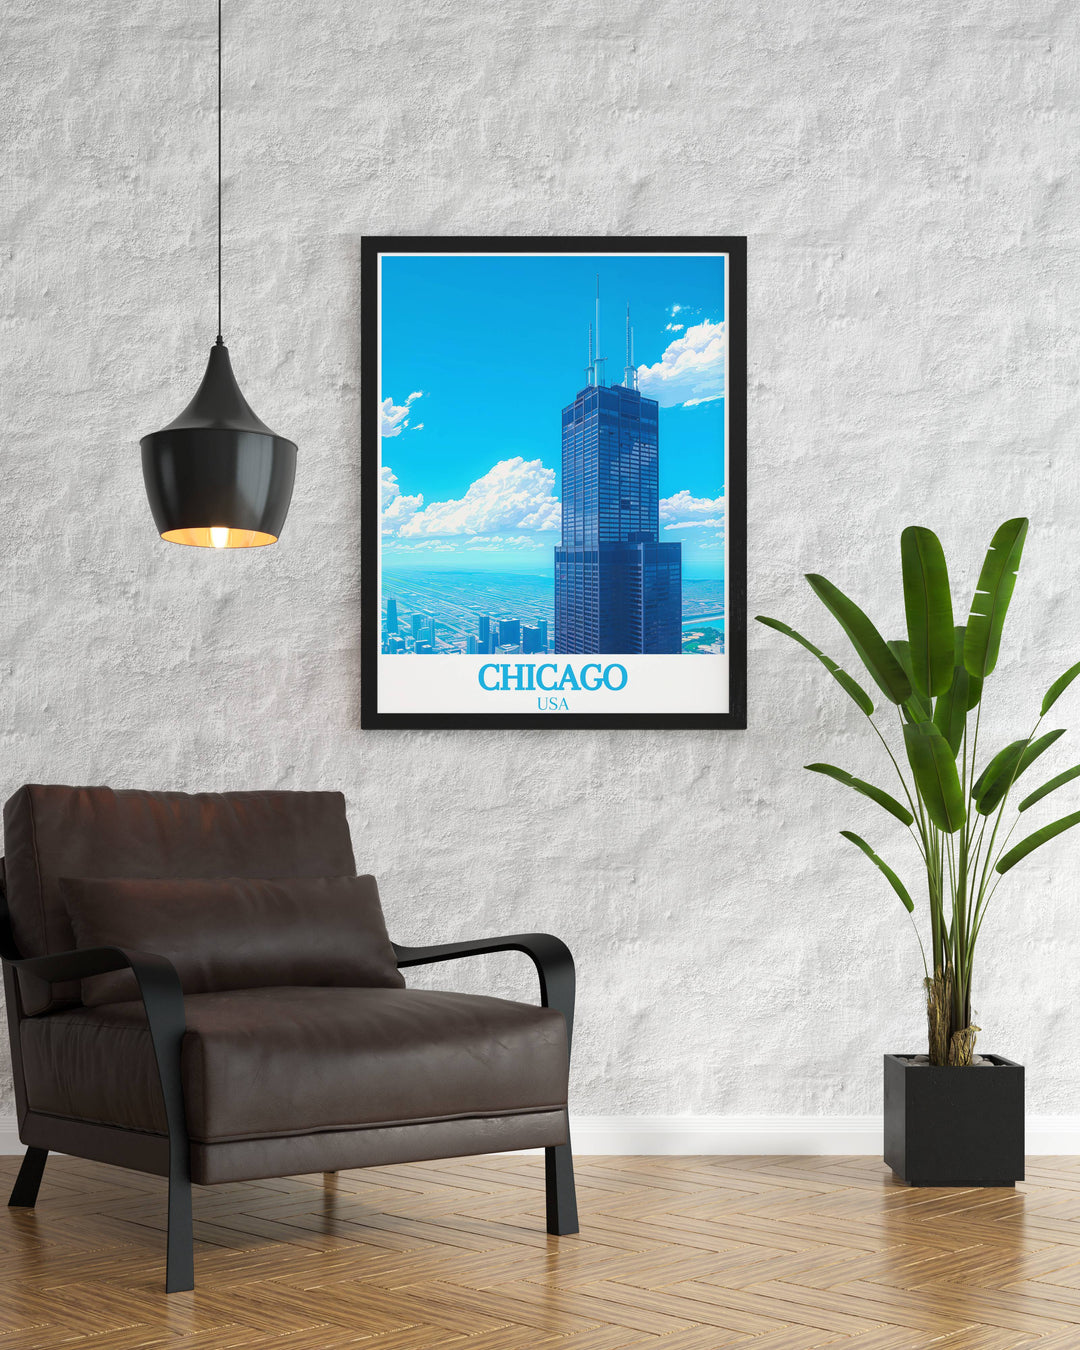 Chicago photograph of The Willis Tower Formerly Sears Tower showcasing its grandeur and architectural detail. Ideal for creating a focal point in your living space this Chicago art print brings the beauty and magic of the Windy City into your home.